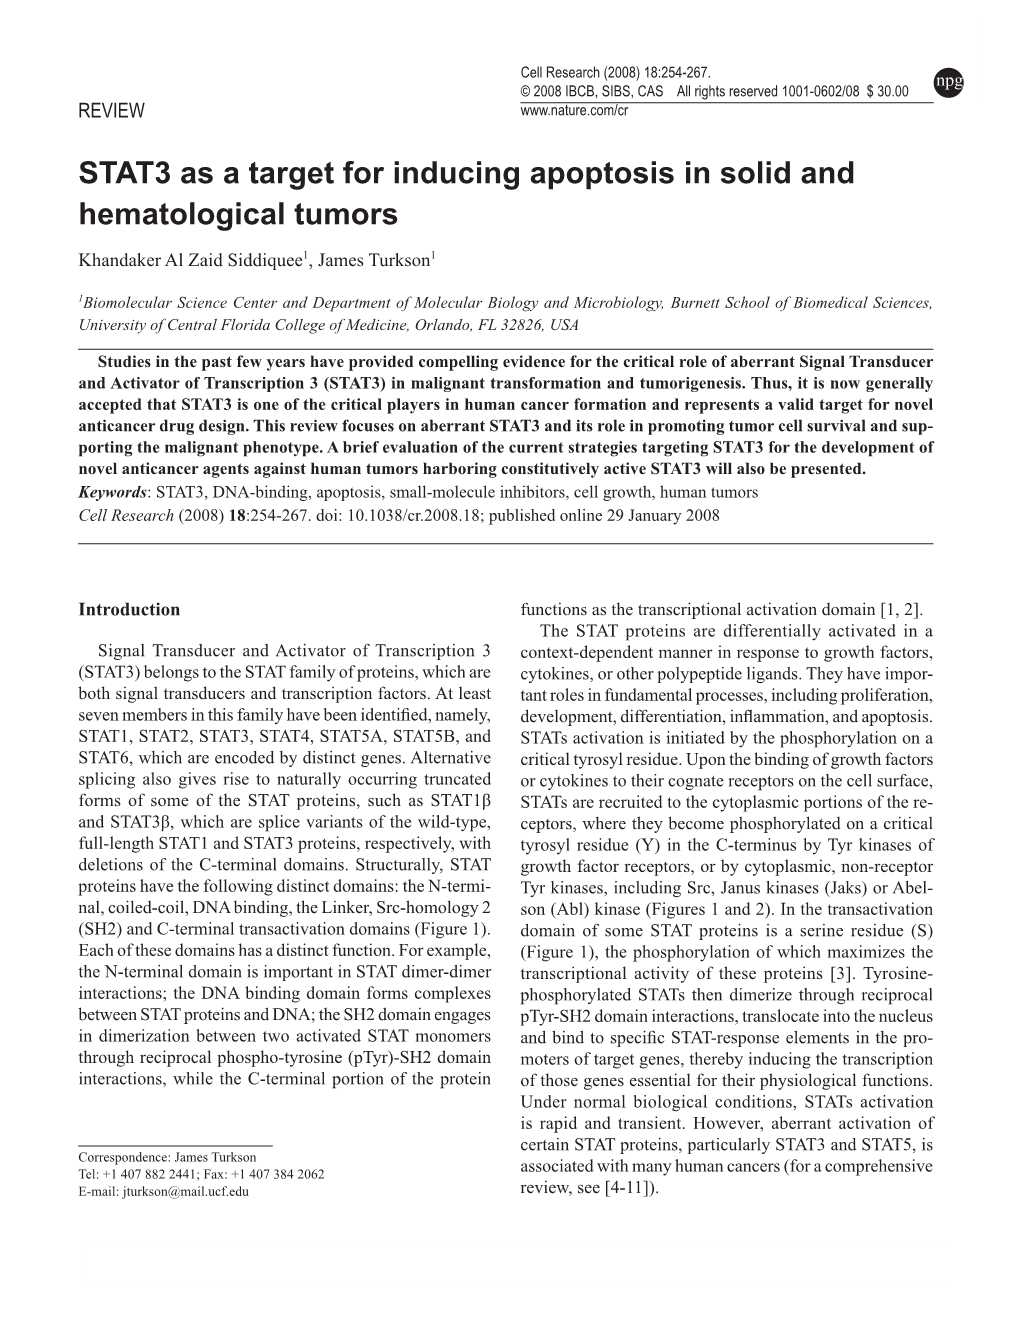 STAT3 As a Target for Inducing Apoptosis in Solid and Hematological Tumors Khandaker Al Zaid Siddiquee1, James Turkson1